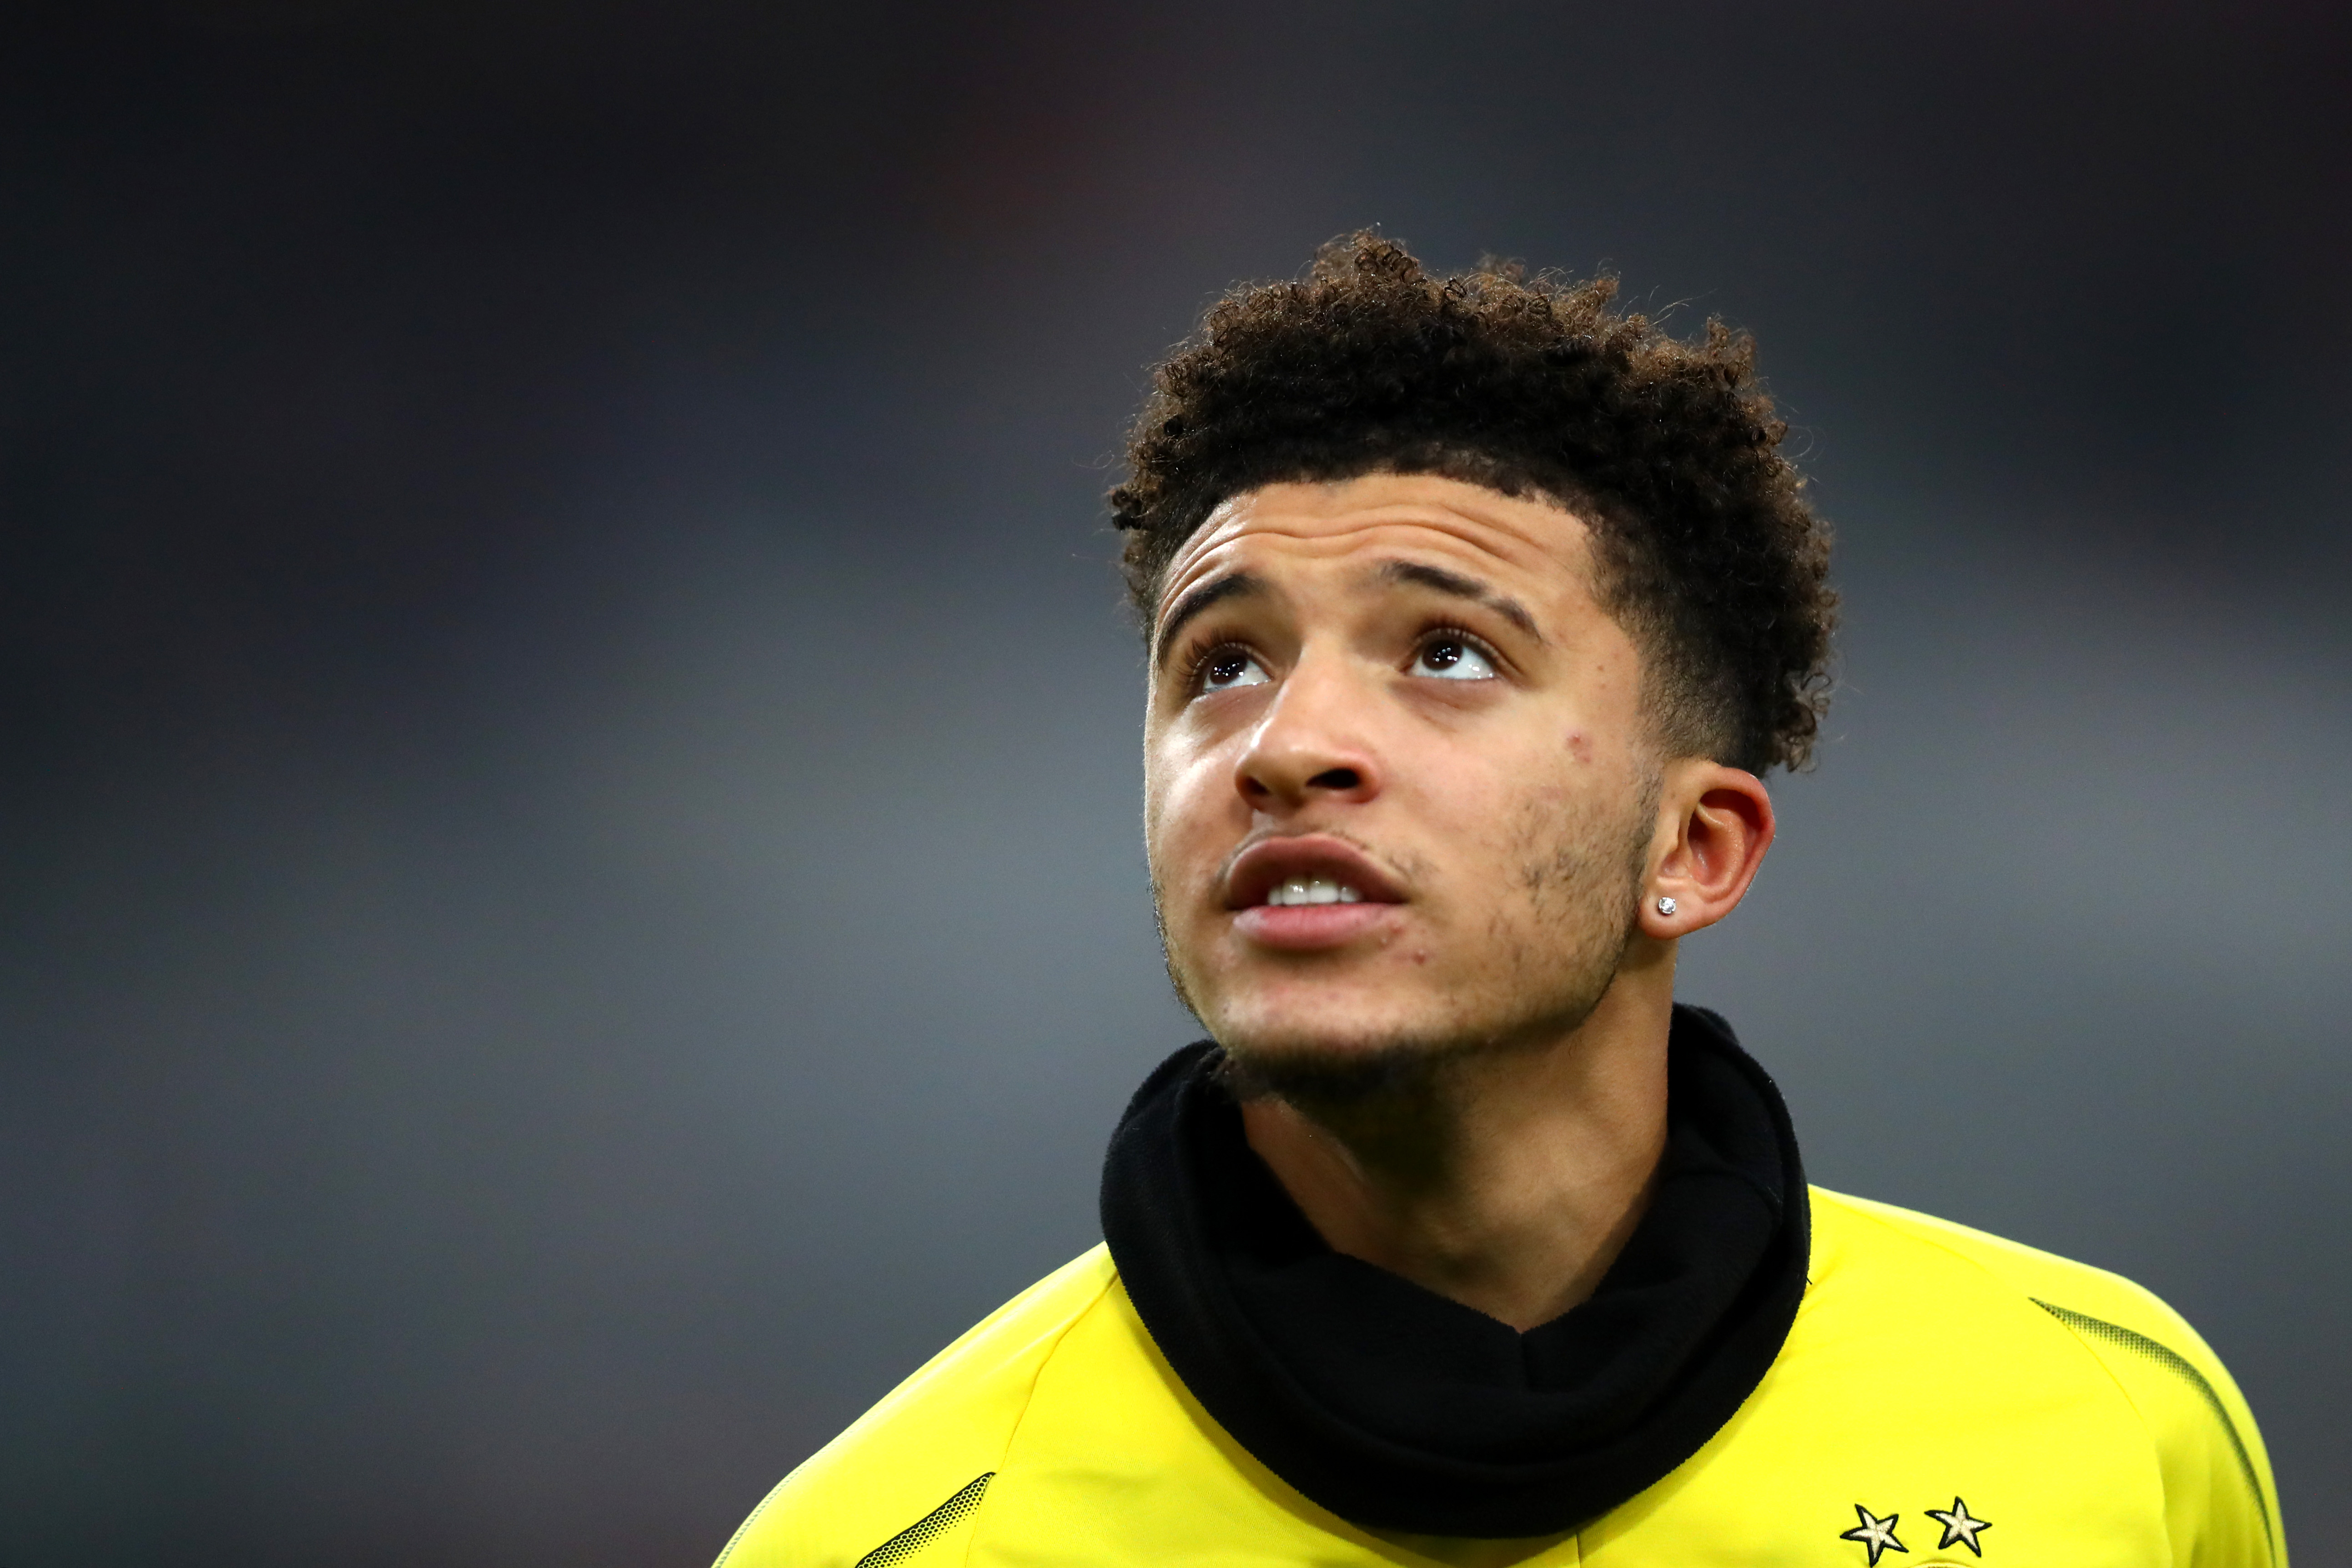 DUESSELDORF, GERMANY - DECEMBER 18:  Jadon Sancho of Borussia Dortmund warms up prior to the Bundesliga match between Fortuna Duesseldorf and Borussia Dortmund at Esprit-Arena on December 18, 2018 in Duesseldorf, Germany.  (Photo by Dean Mouhtaropoulos/Bongarts/Getty Images)